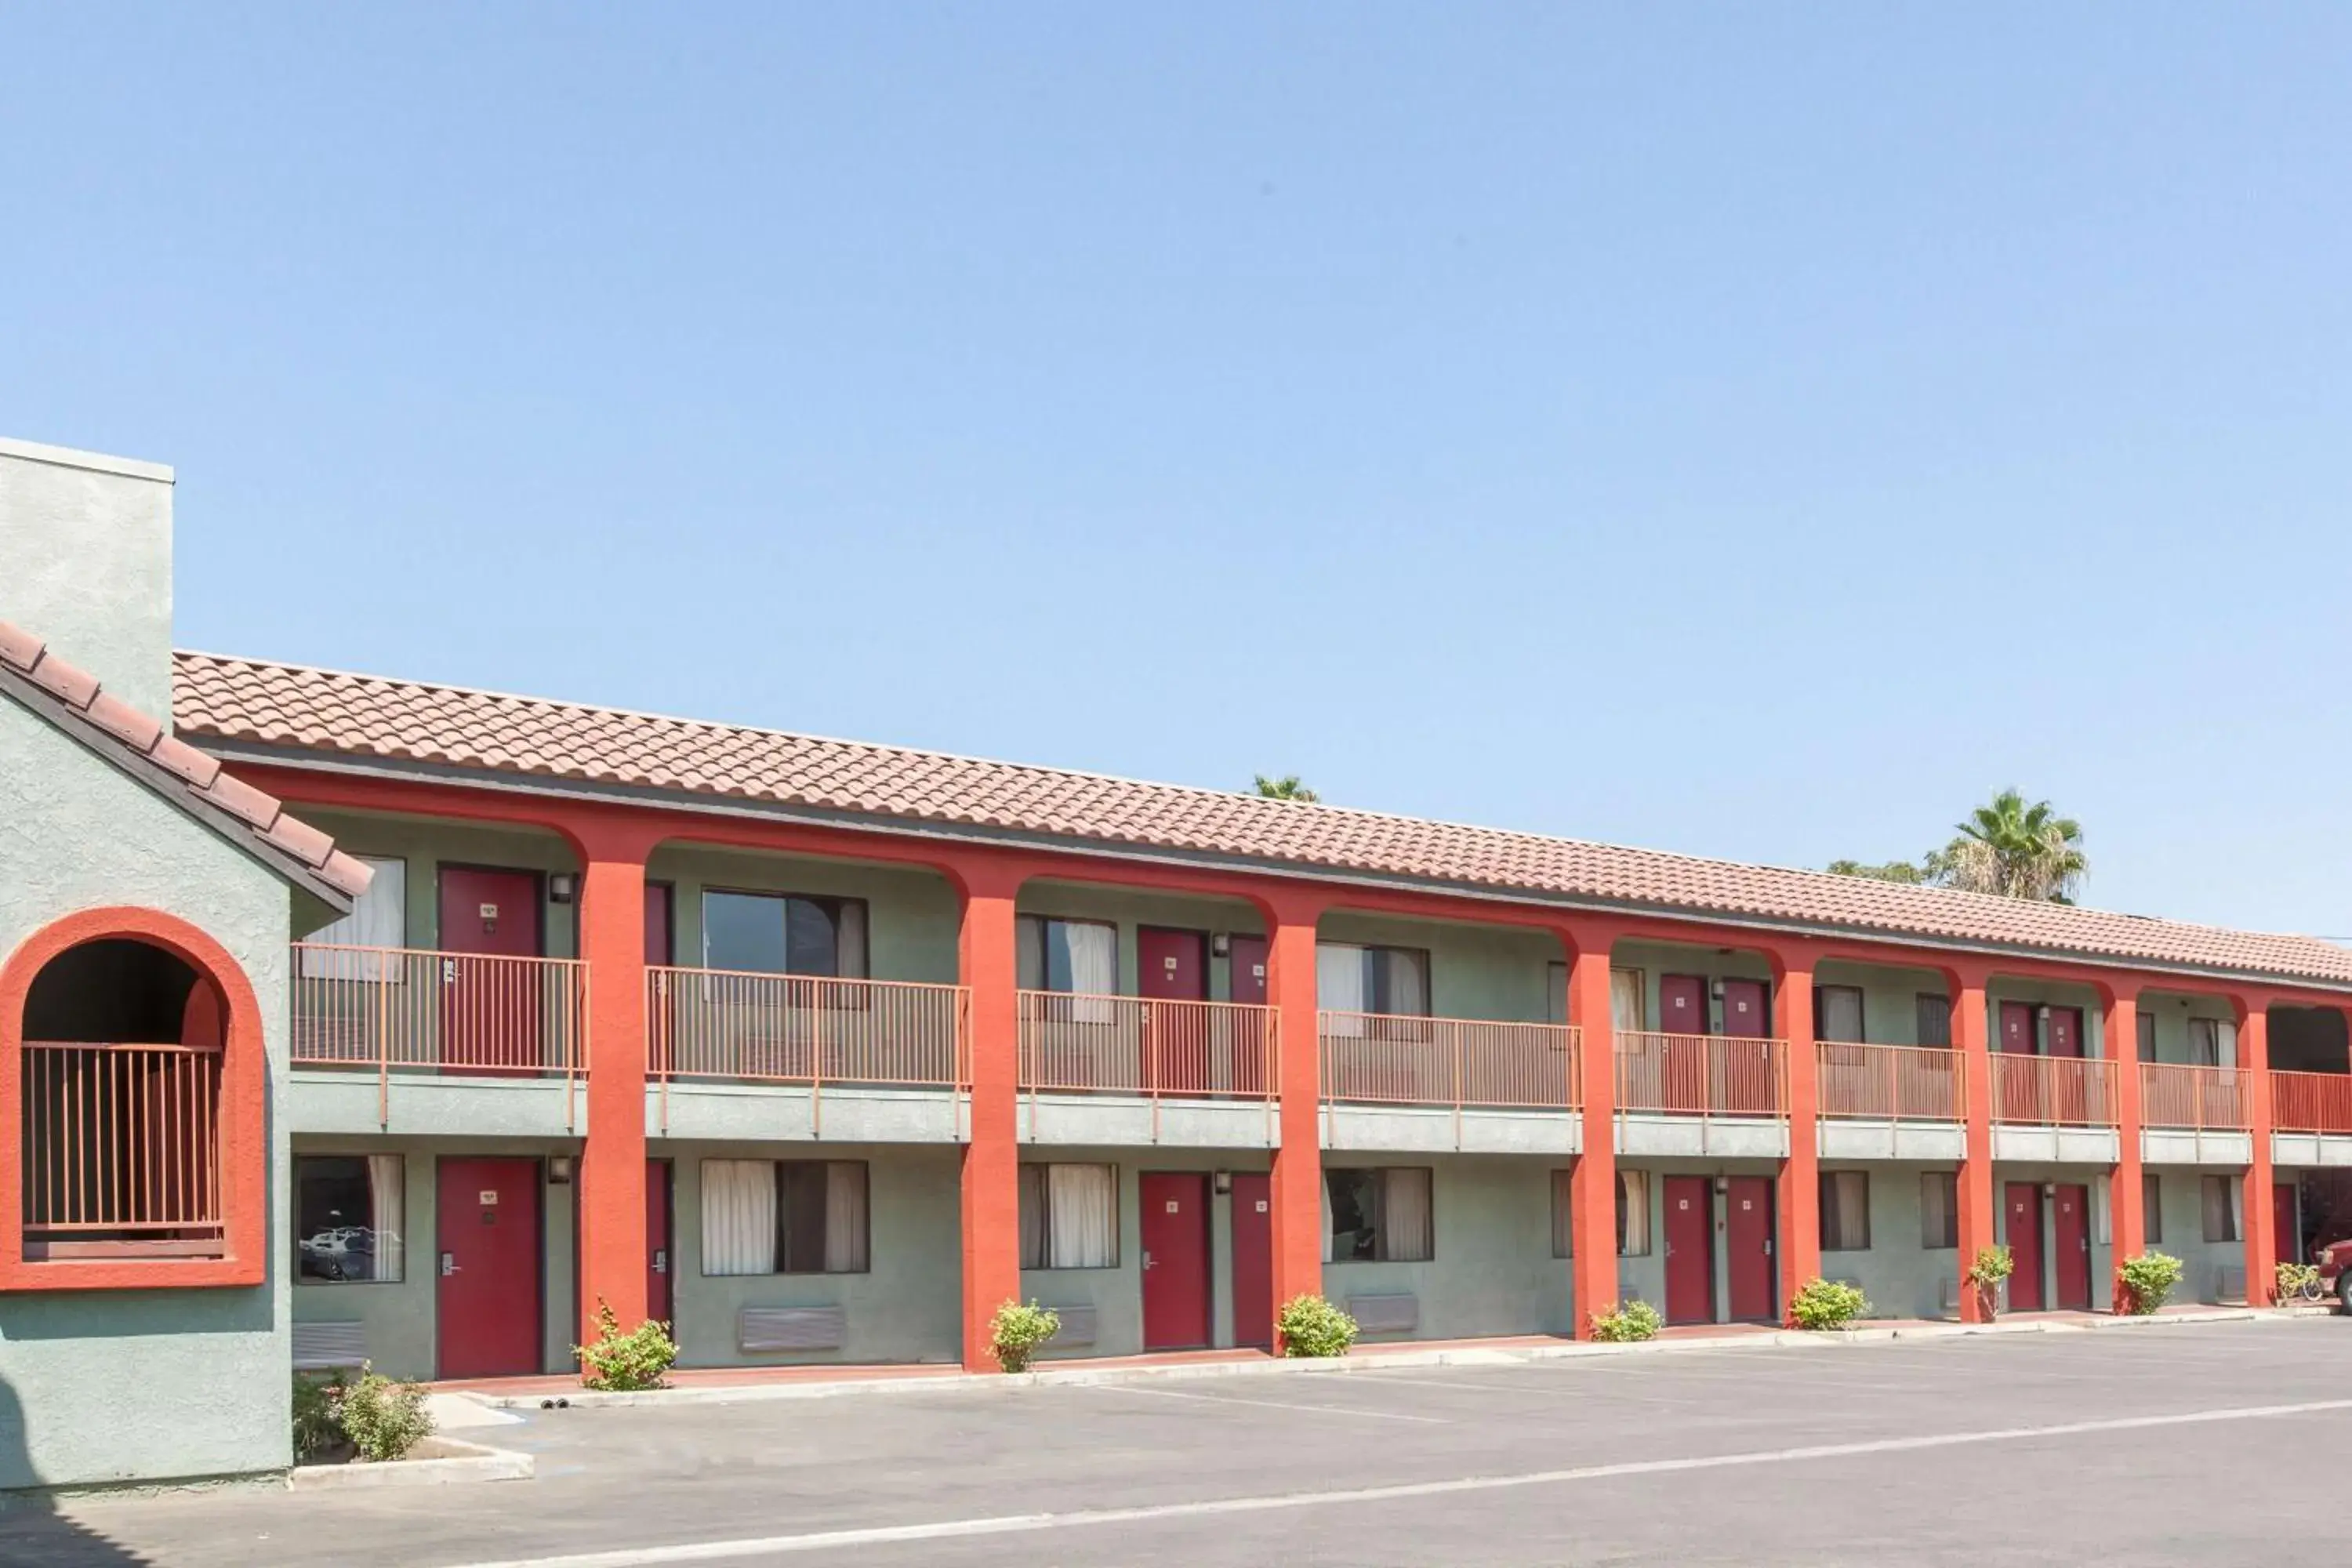 Property building, Facade/Entrance in America's Best Value Inn & Suites Bakersfield Central